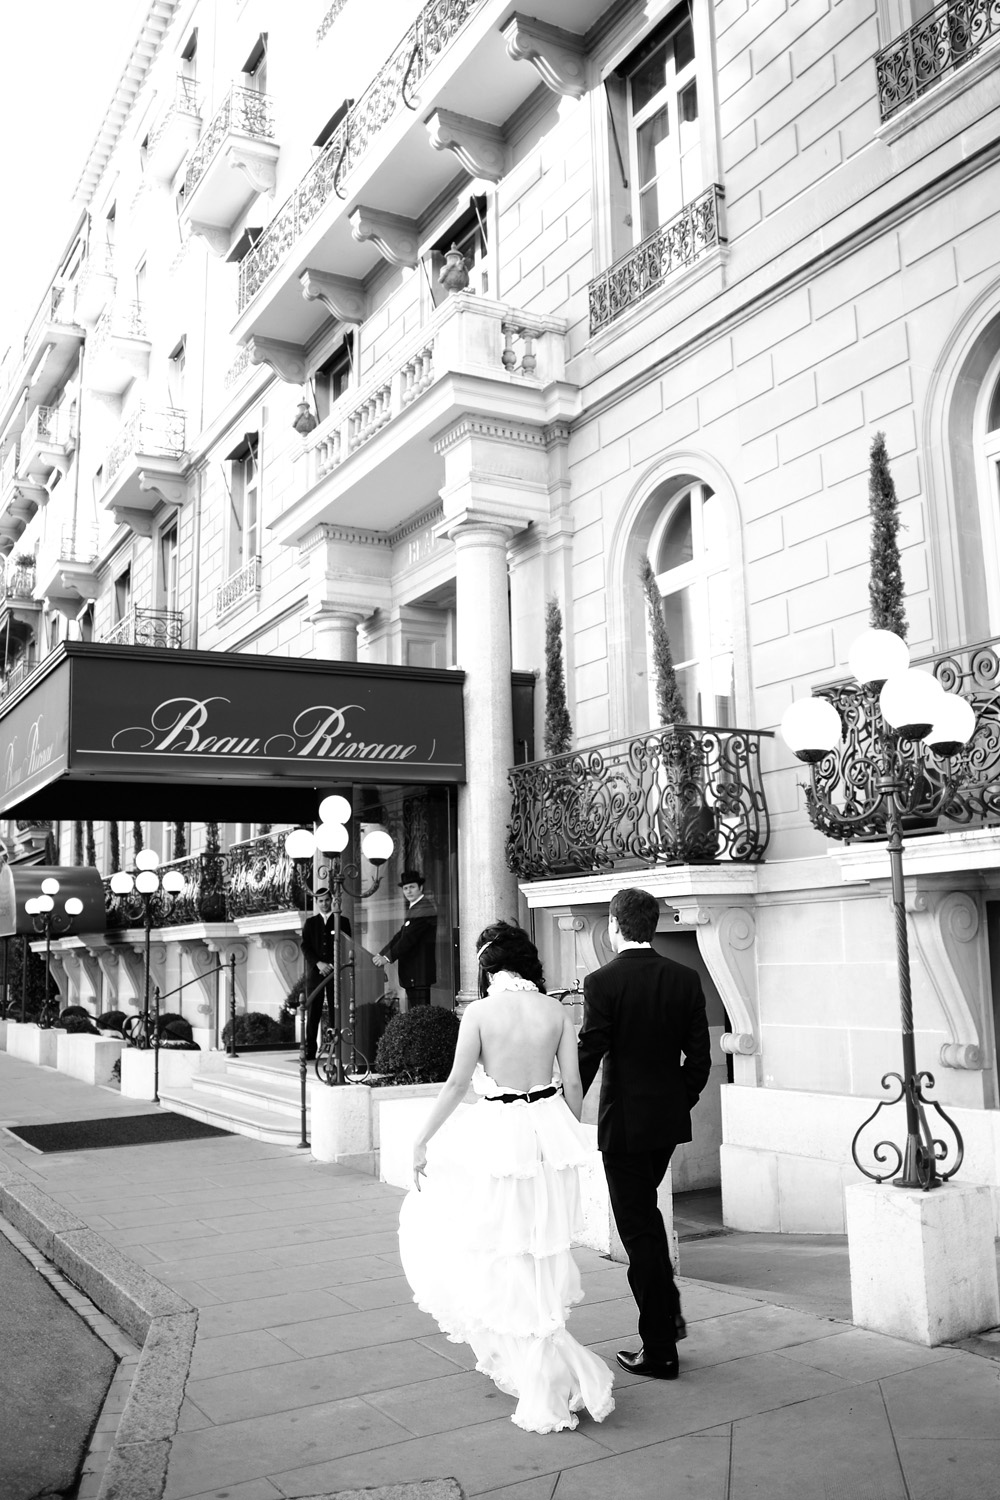 Danielle and Patric's wedding photos taken at the Beau Rivage in Geneva by wedding photographer Switzerland XOANDREA